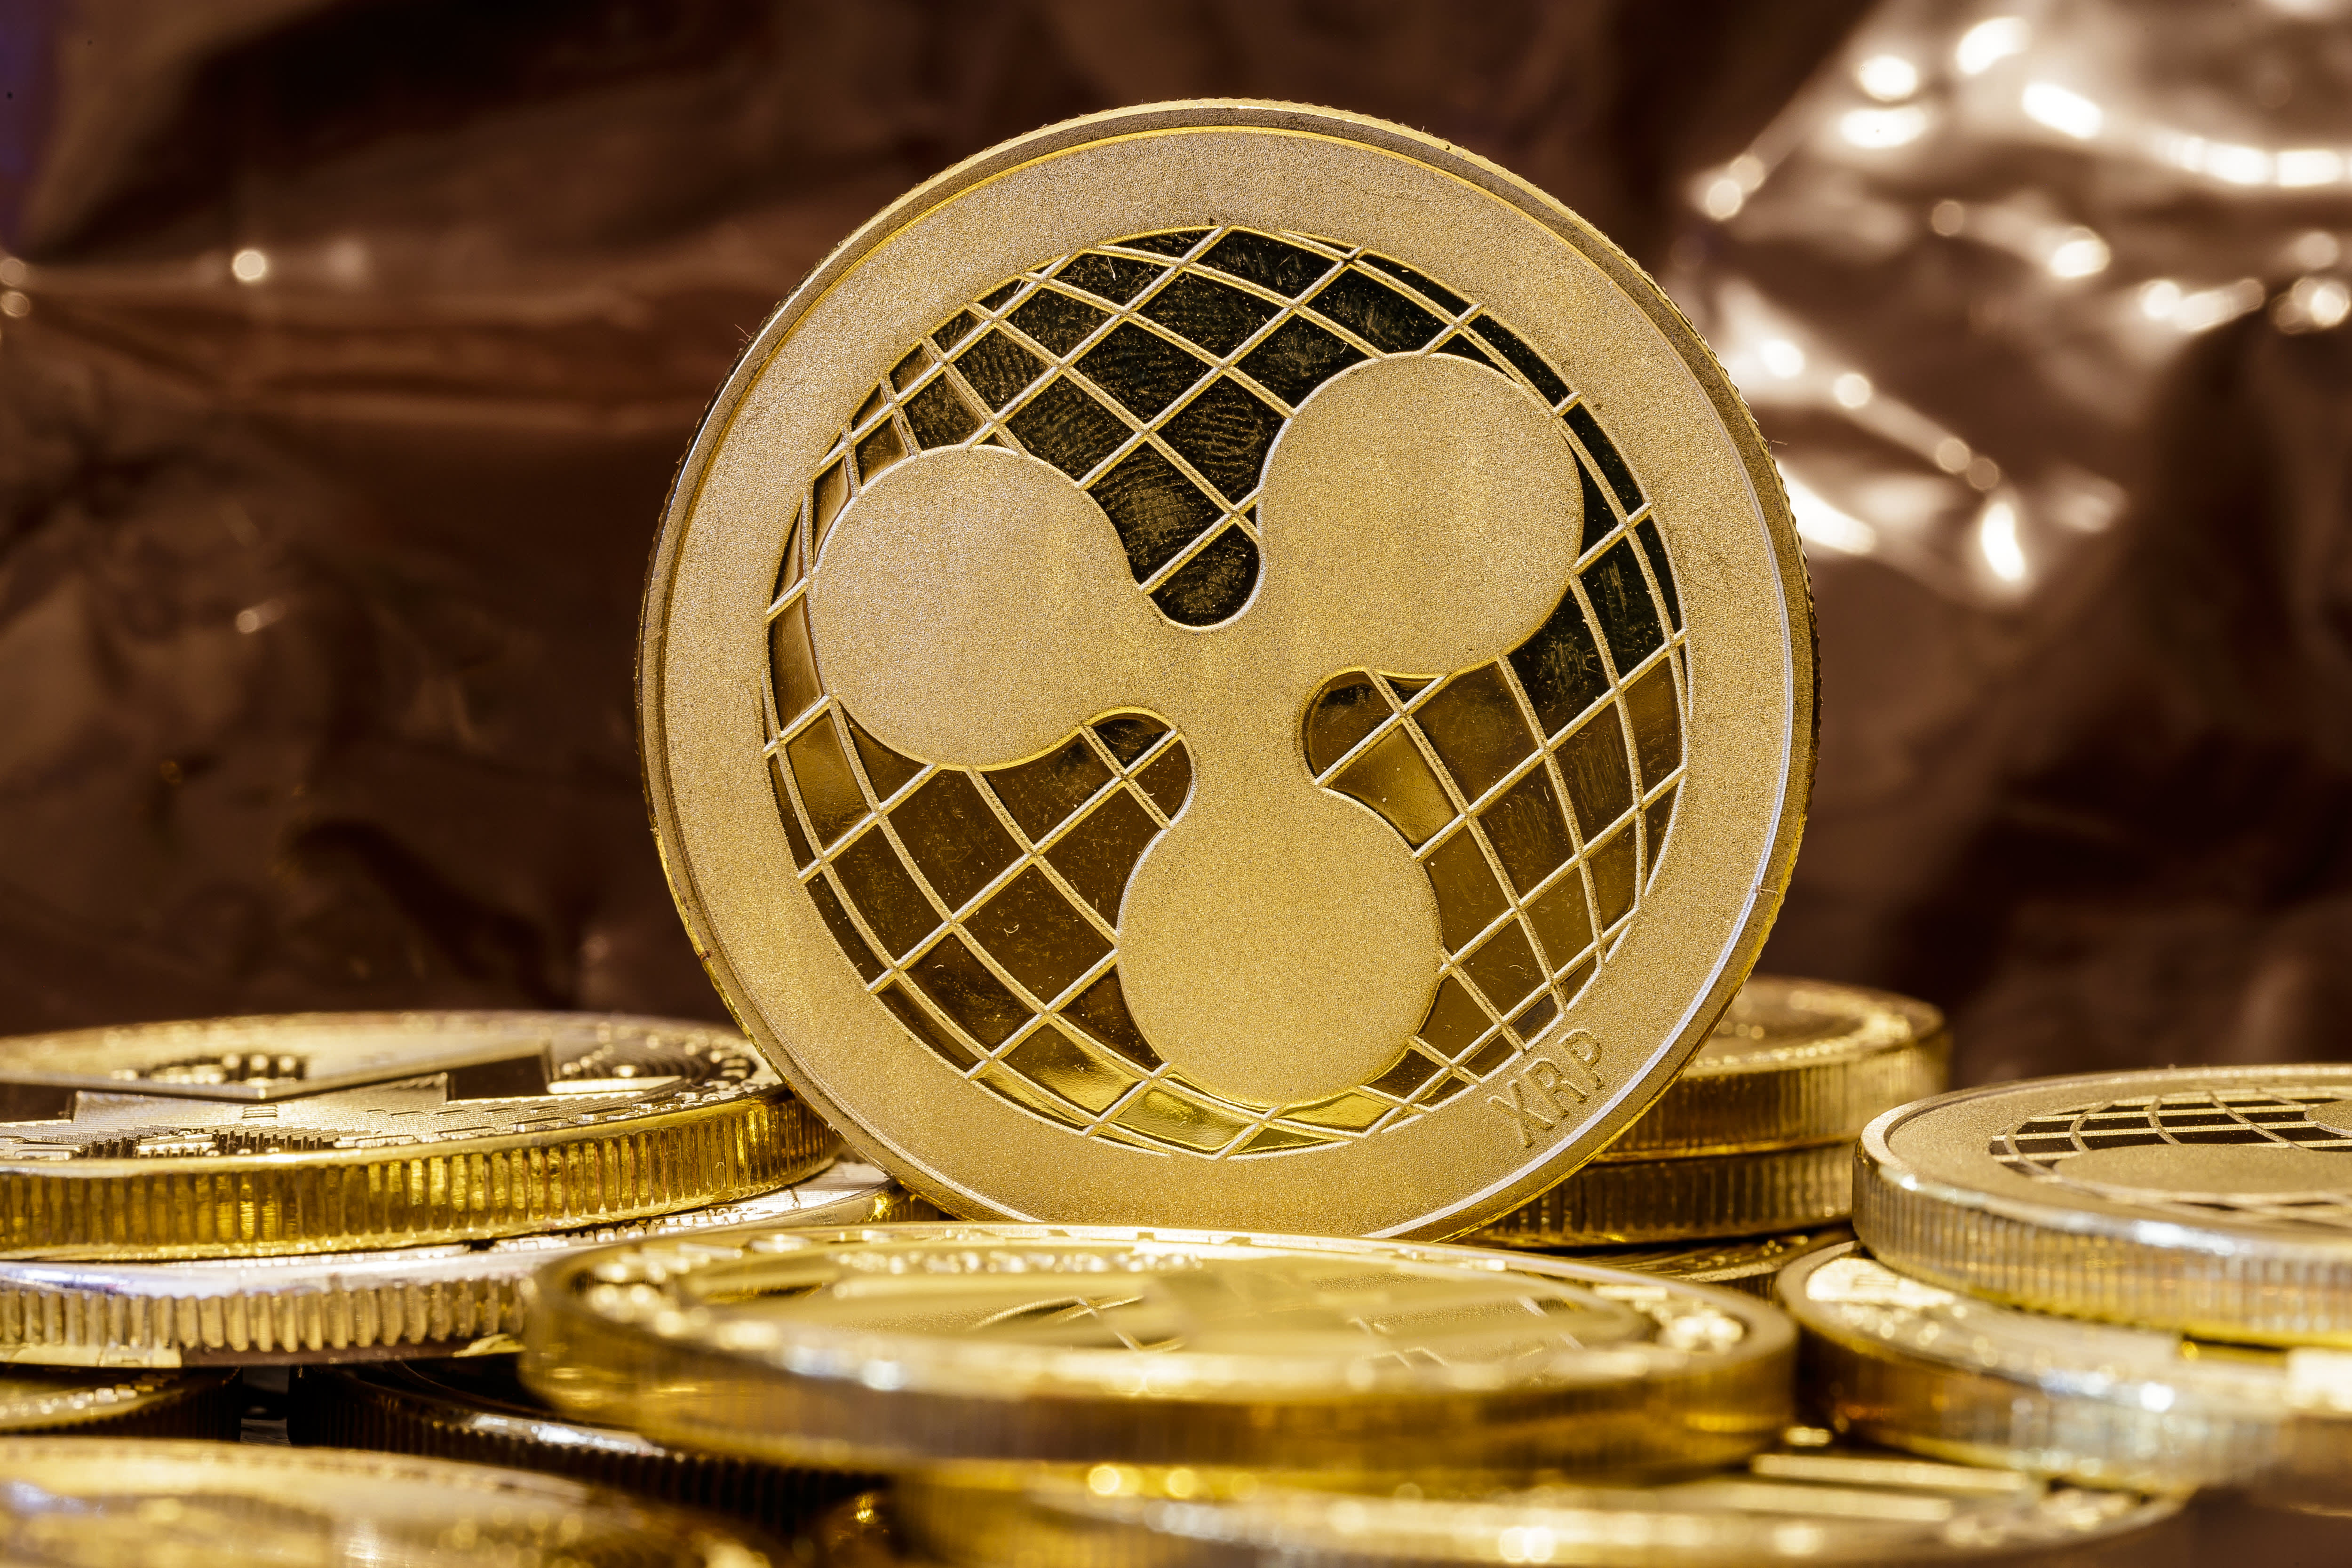 Ripple Must Share Financial Statements, XRP Institutional Sales Data, Court Rules on SEC Request